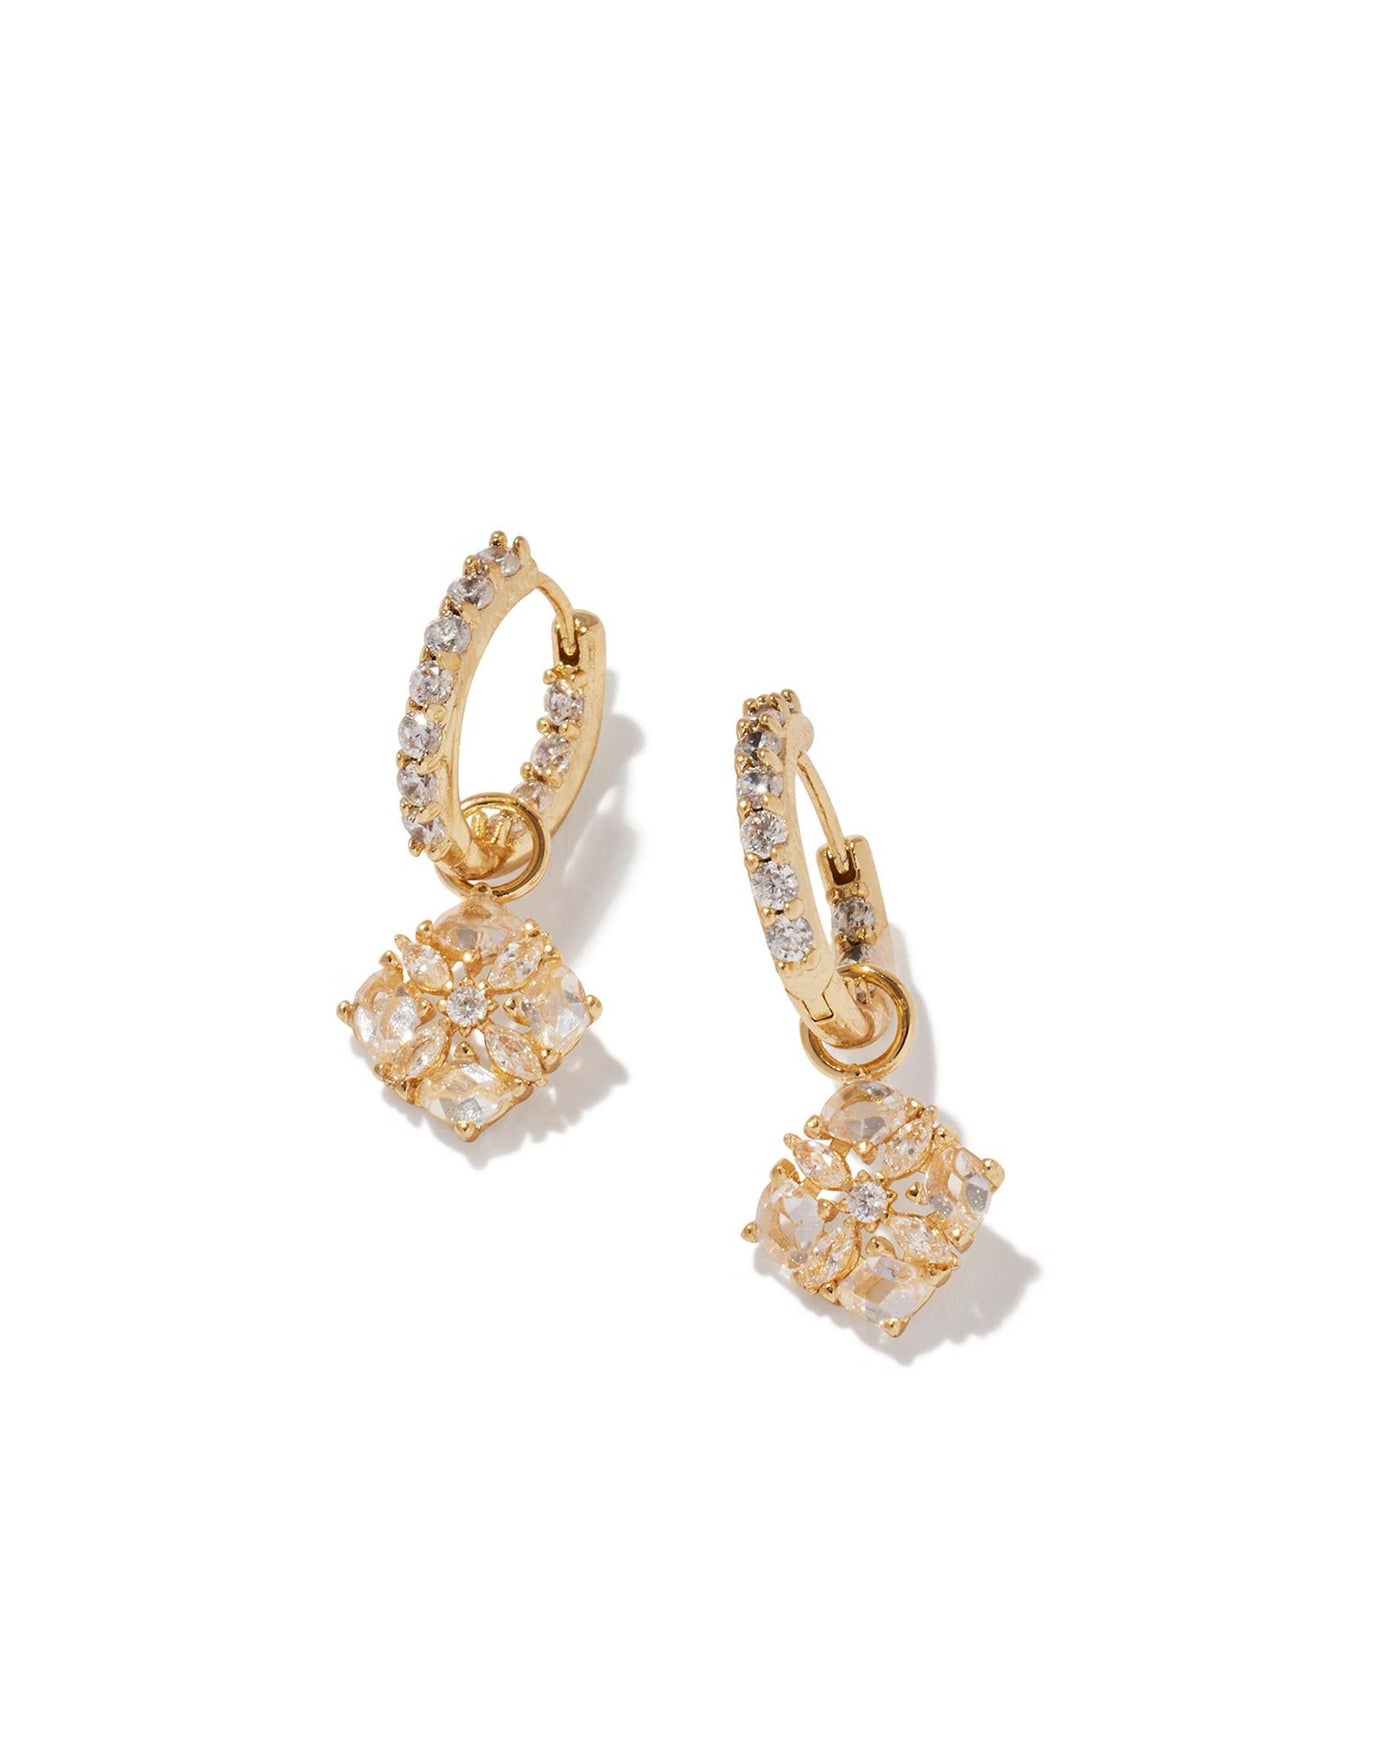 Gold Tone Earrings Featuring White Crystal by Kendra Scott